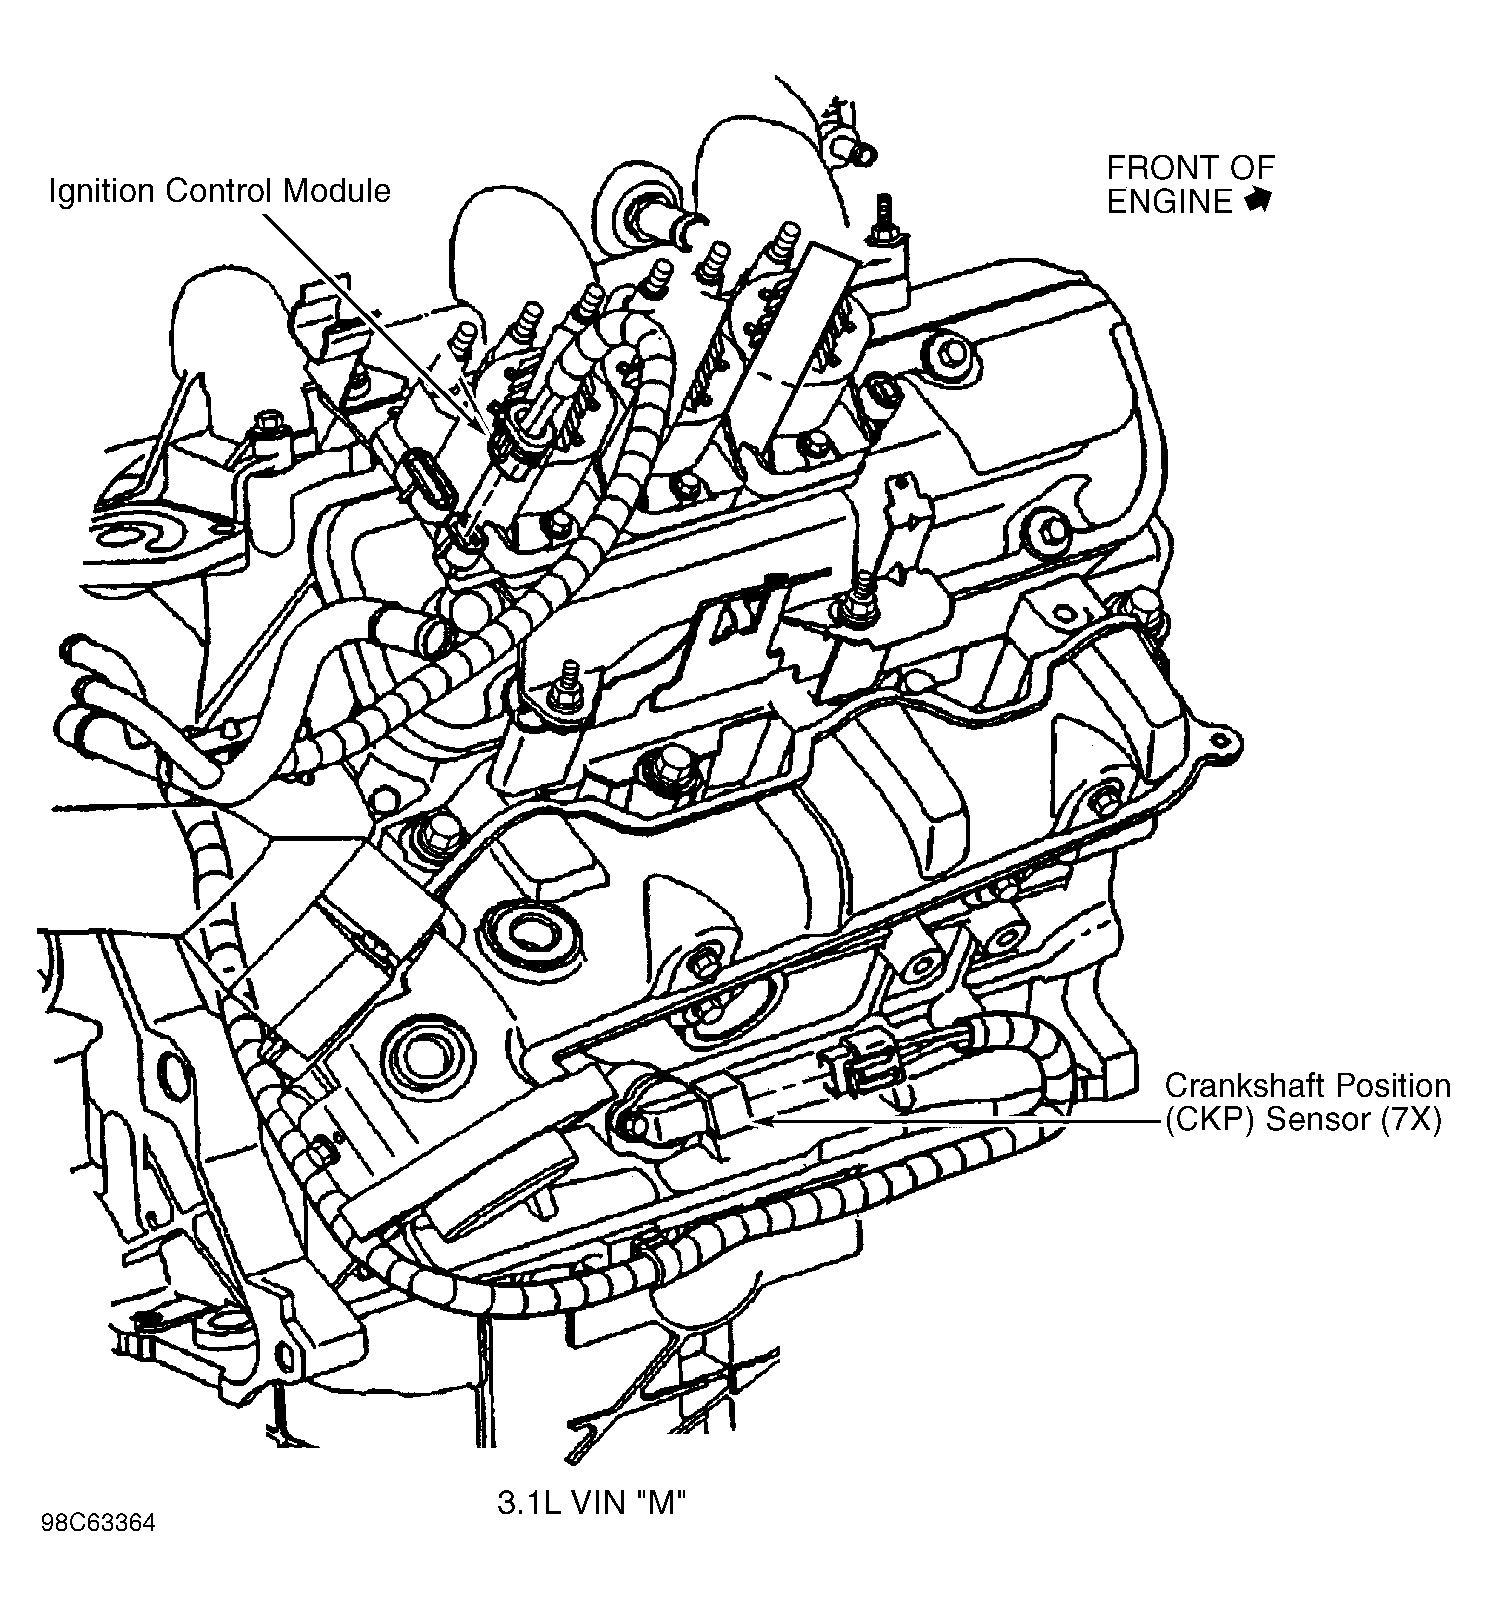 Chevrolet Lumina 1999 - Component Locations -  Right Side Of Engine (3.1L VIN M)